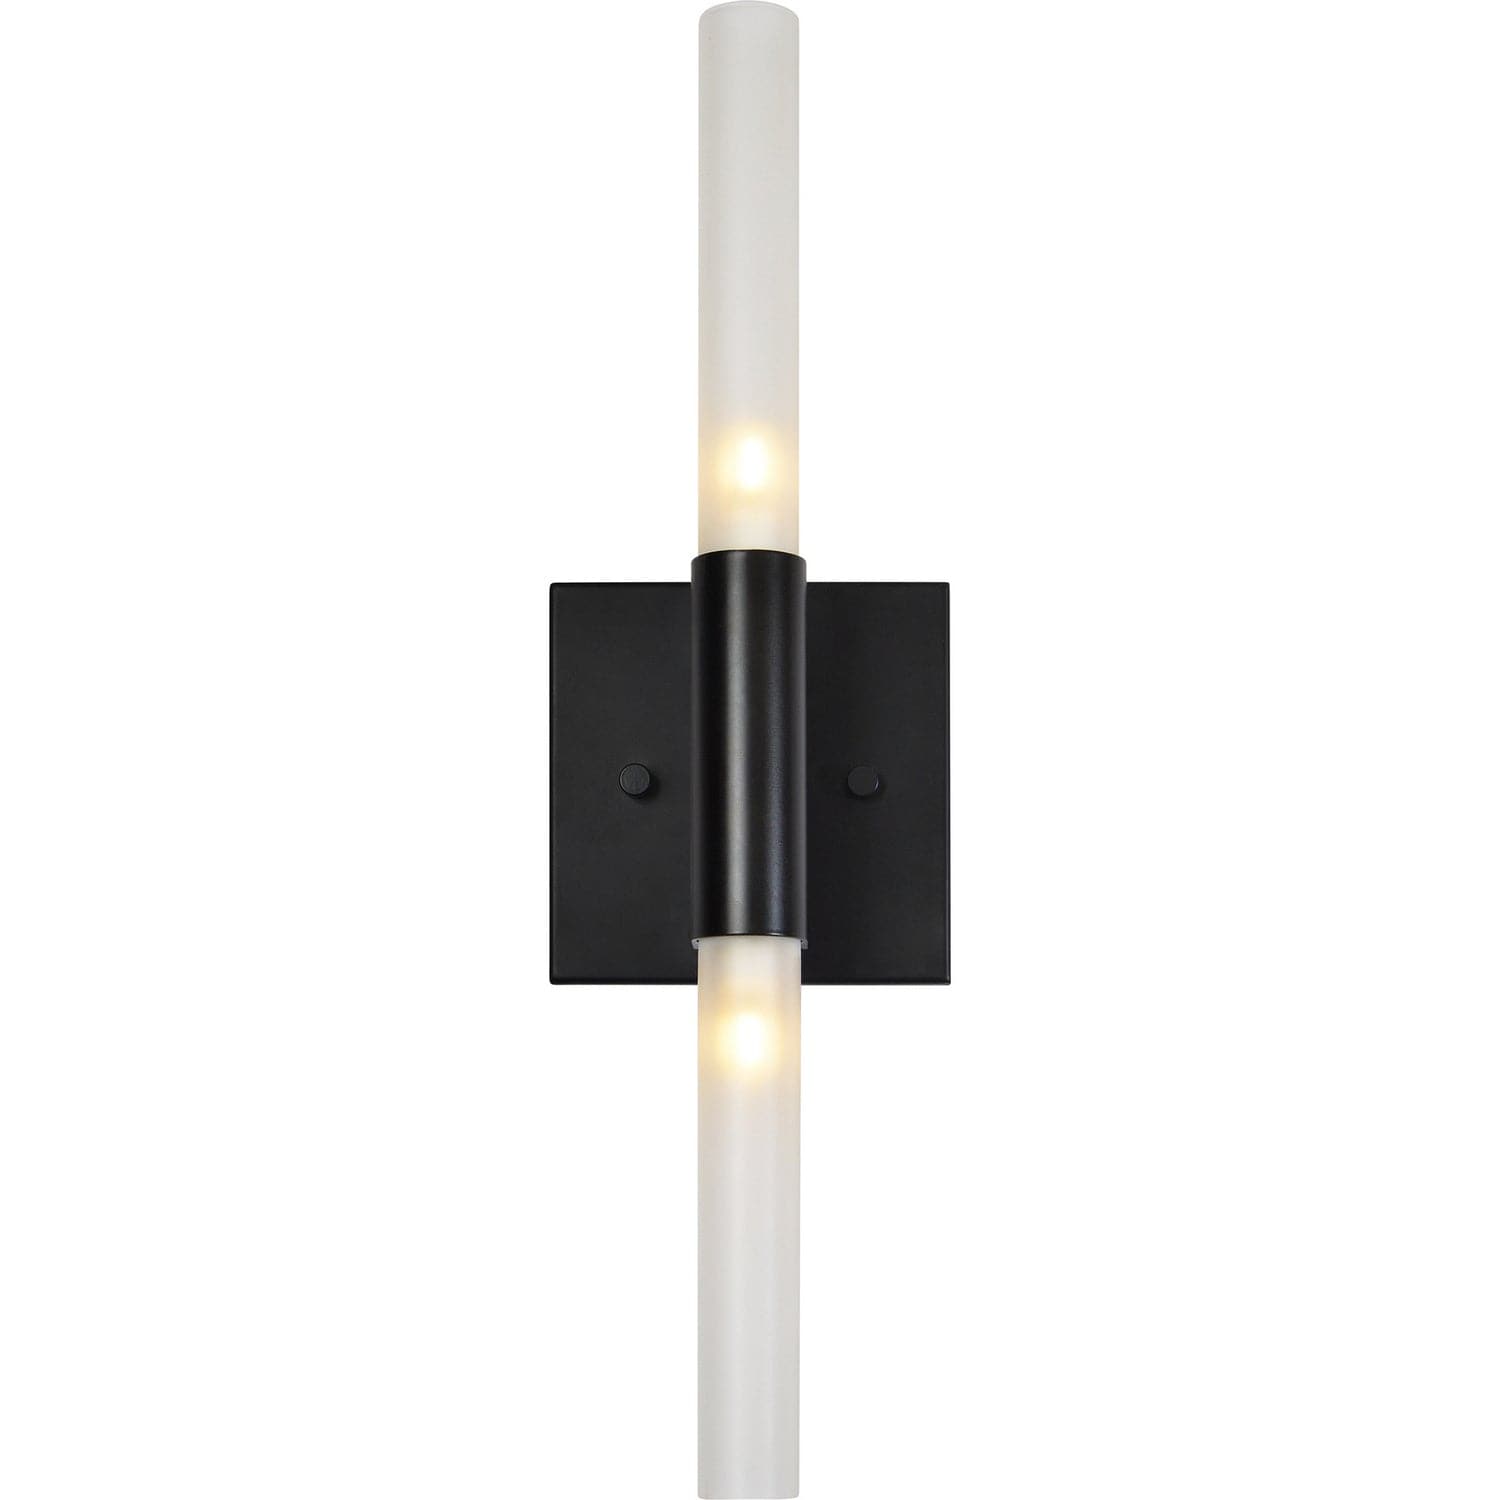 Renwil - WS118 - Two Light Wall Sconce - Lina - Matte Black